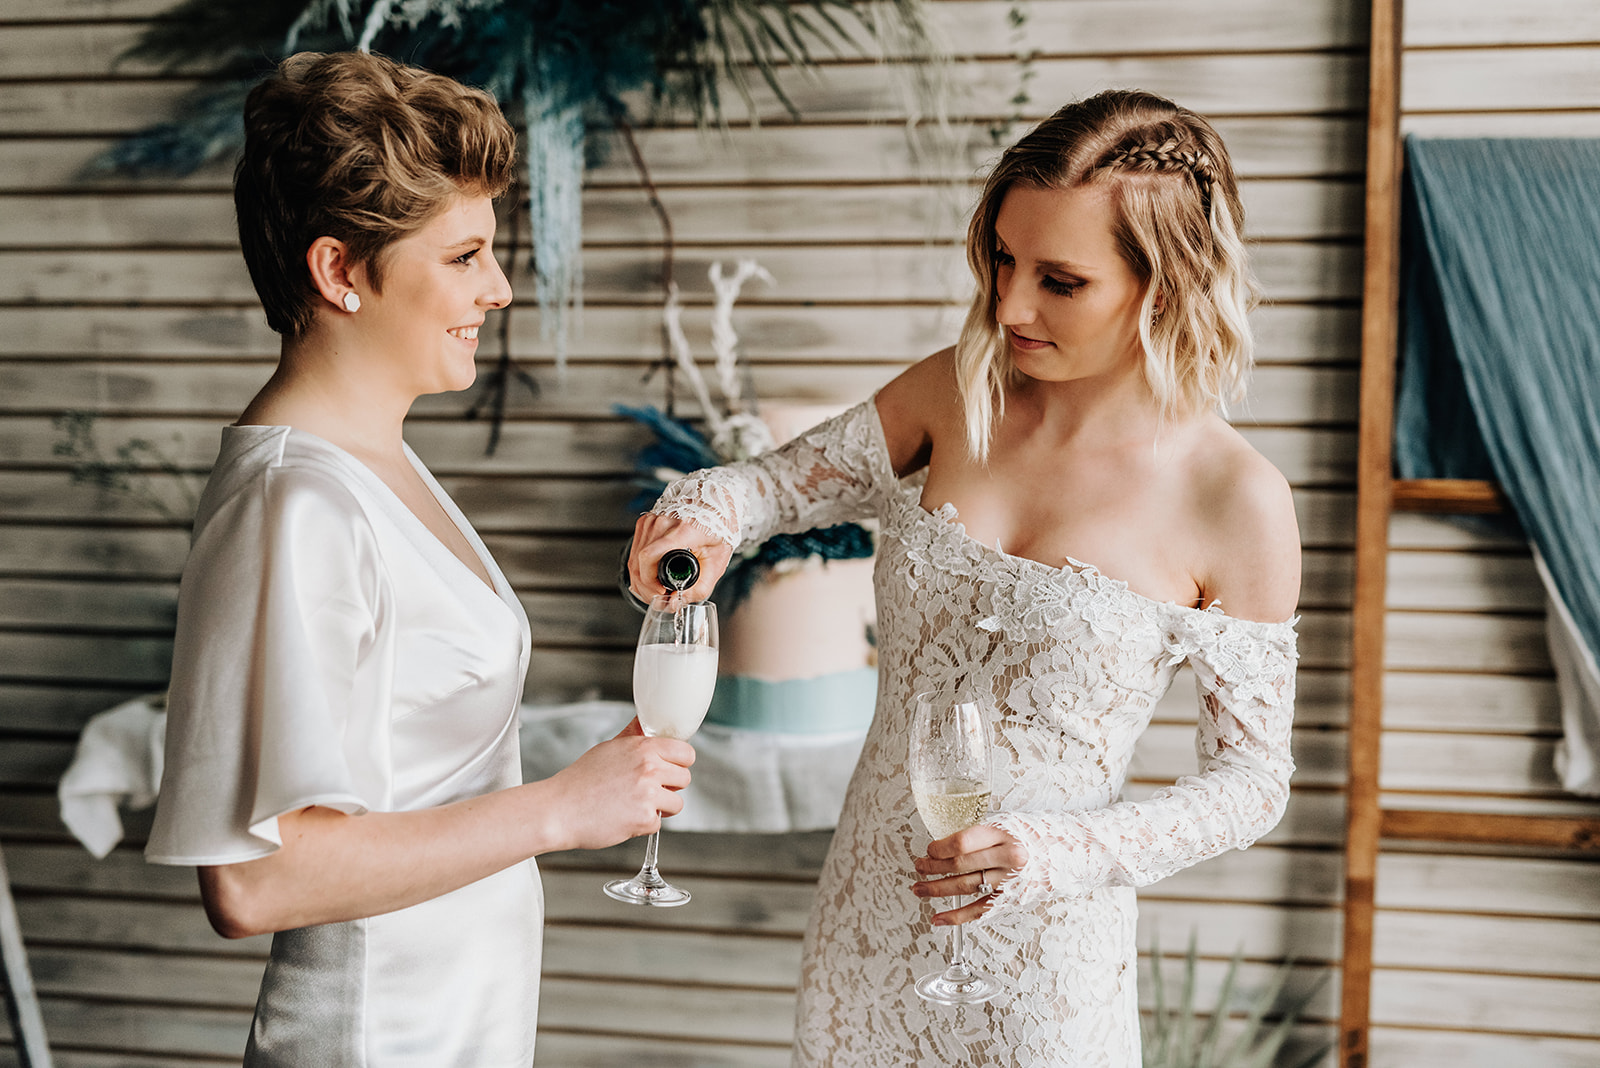 Brides share champagne for this intimate bohemian elopement